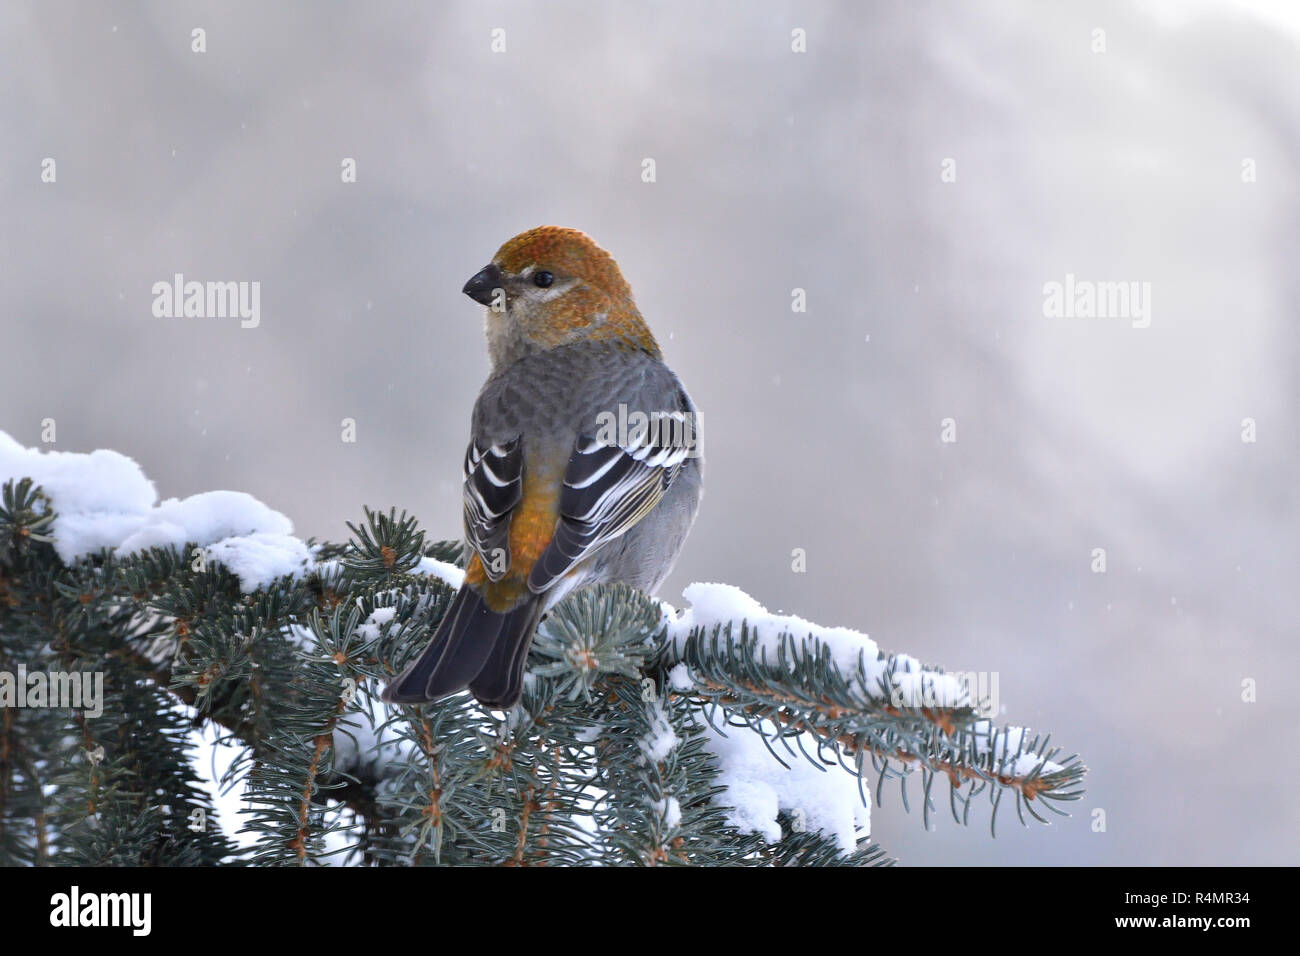 A rear view  of a wild female Pine Grosbeak  (Pinicola enucleator) bird perched on a snow covered spruce tree branch looking back in rural Alberta Can Stock Photo